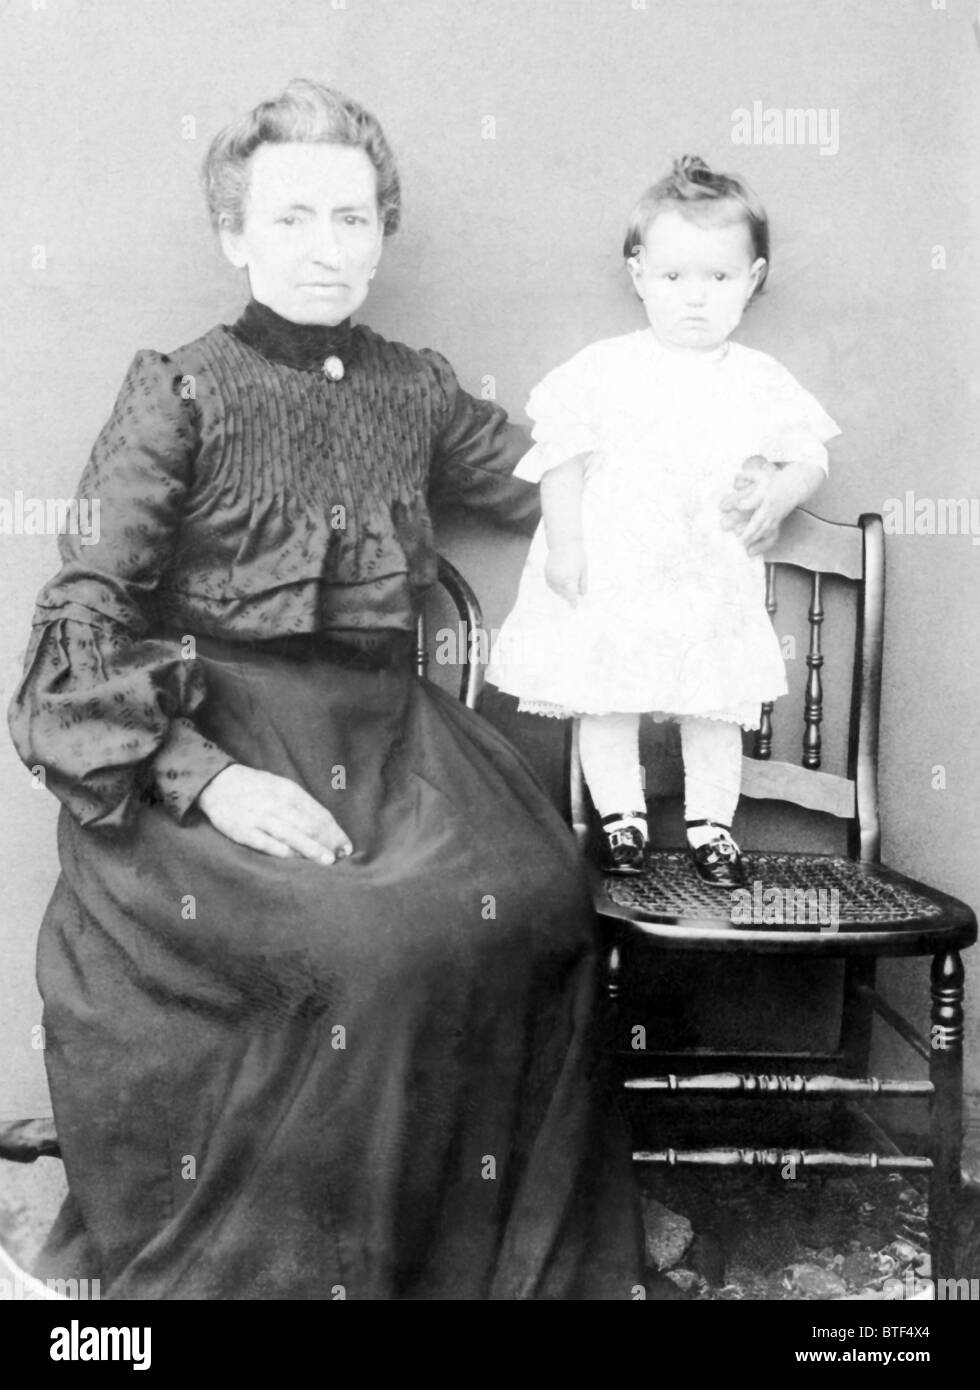 This photo taken in New Bedford, MA, in the late 1800s shows an older woman with a toddler standing on a chair. Stock Photo